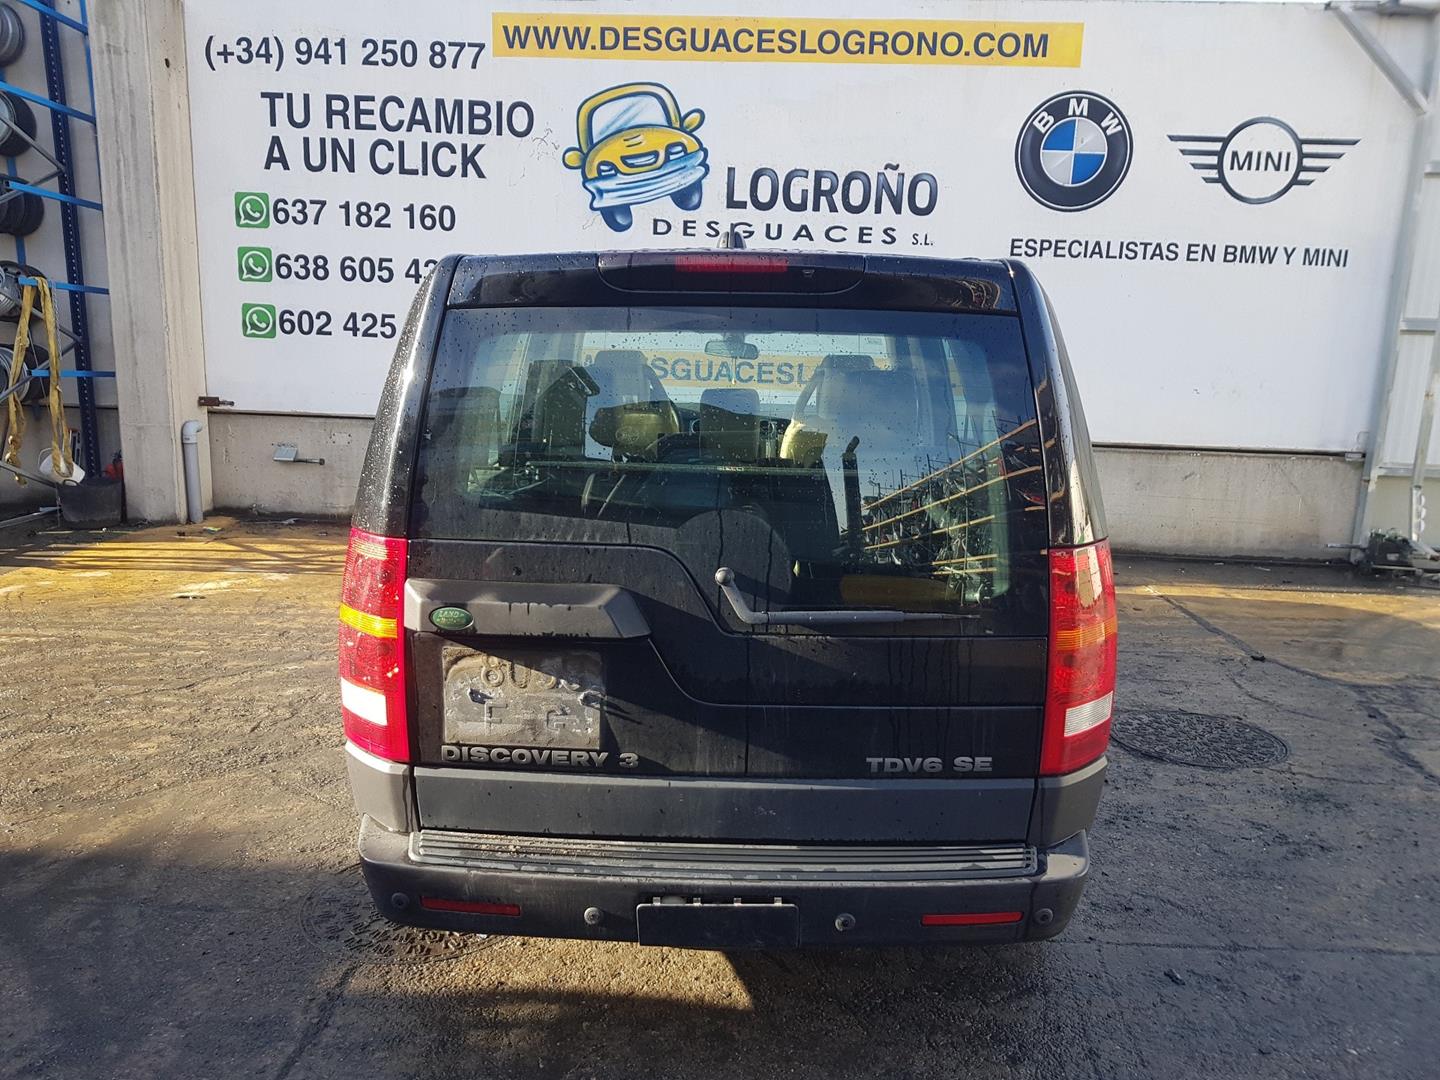 LAND ROVER Discovery 3 generation (2004-2009) Smagratis 4602282, 4602282, 1111AA 24238338